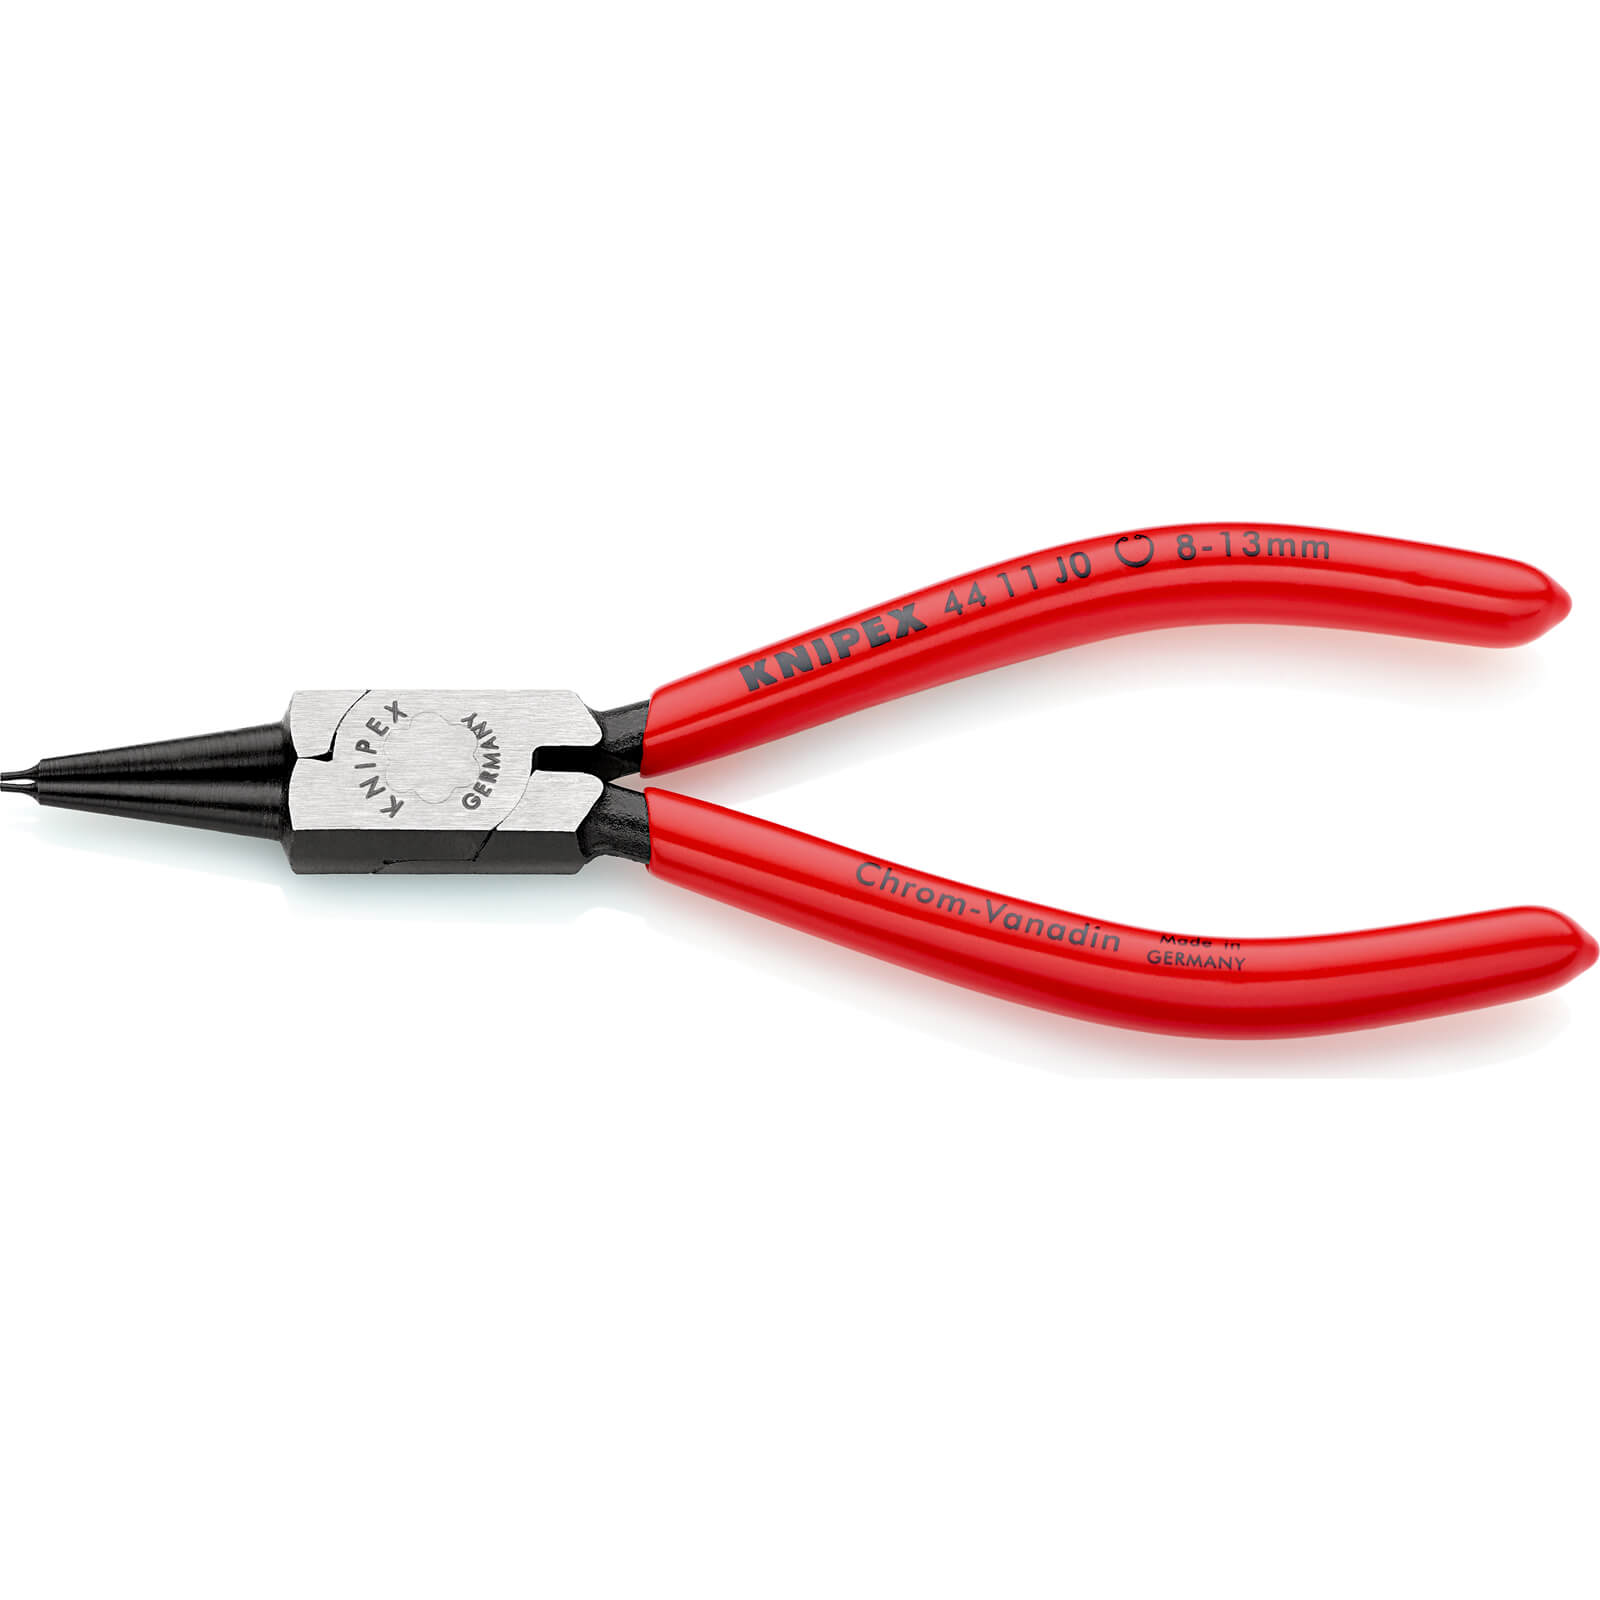 Photo of Knipex 44 11 Internal Straight Circlip Pliers 8mm - 13mm